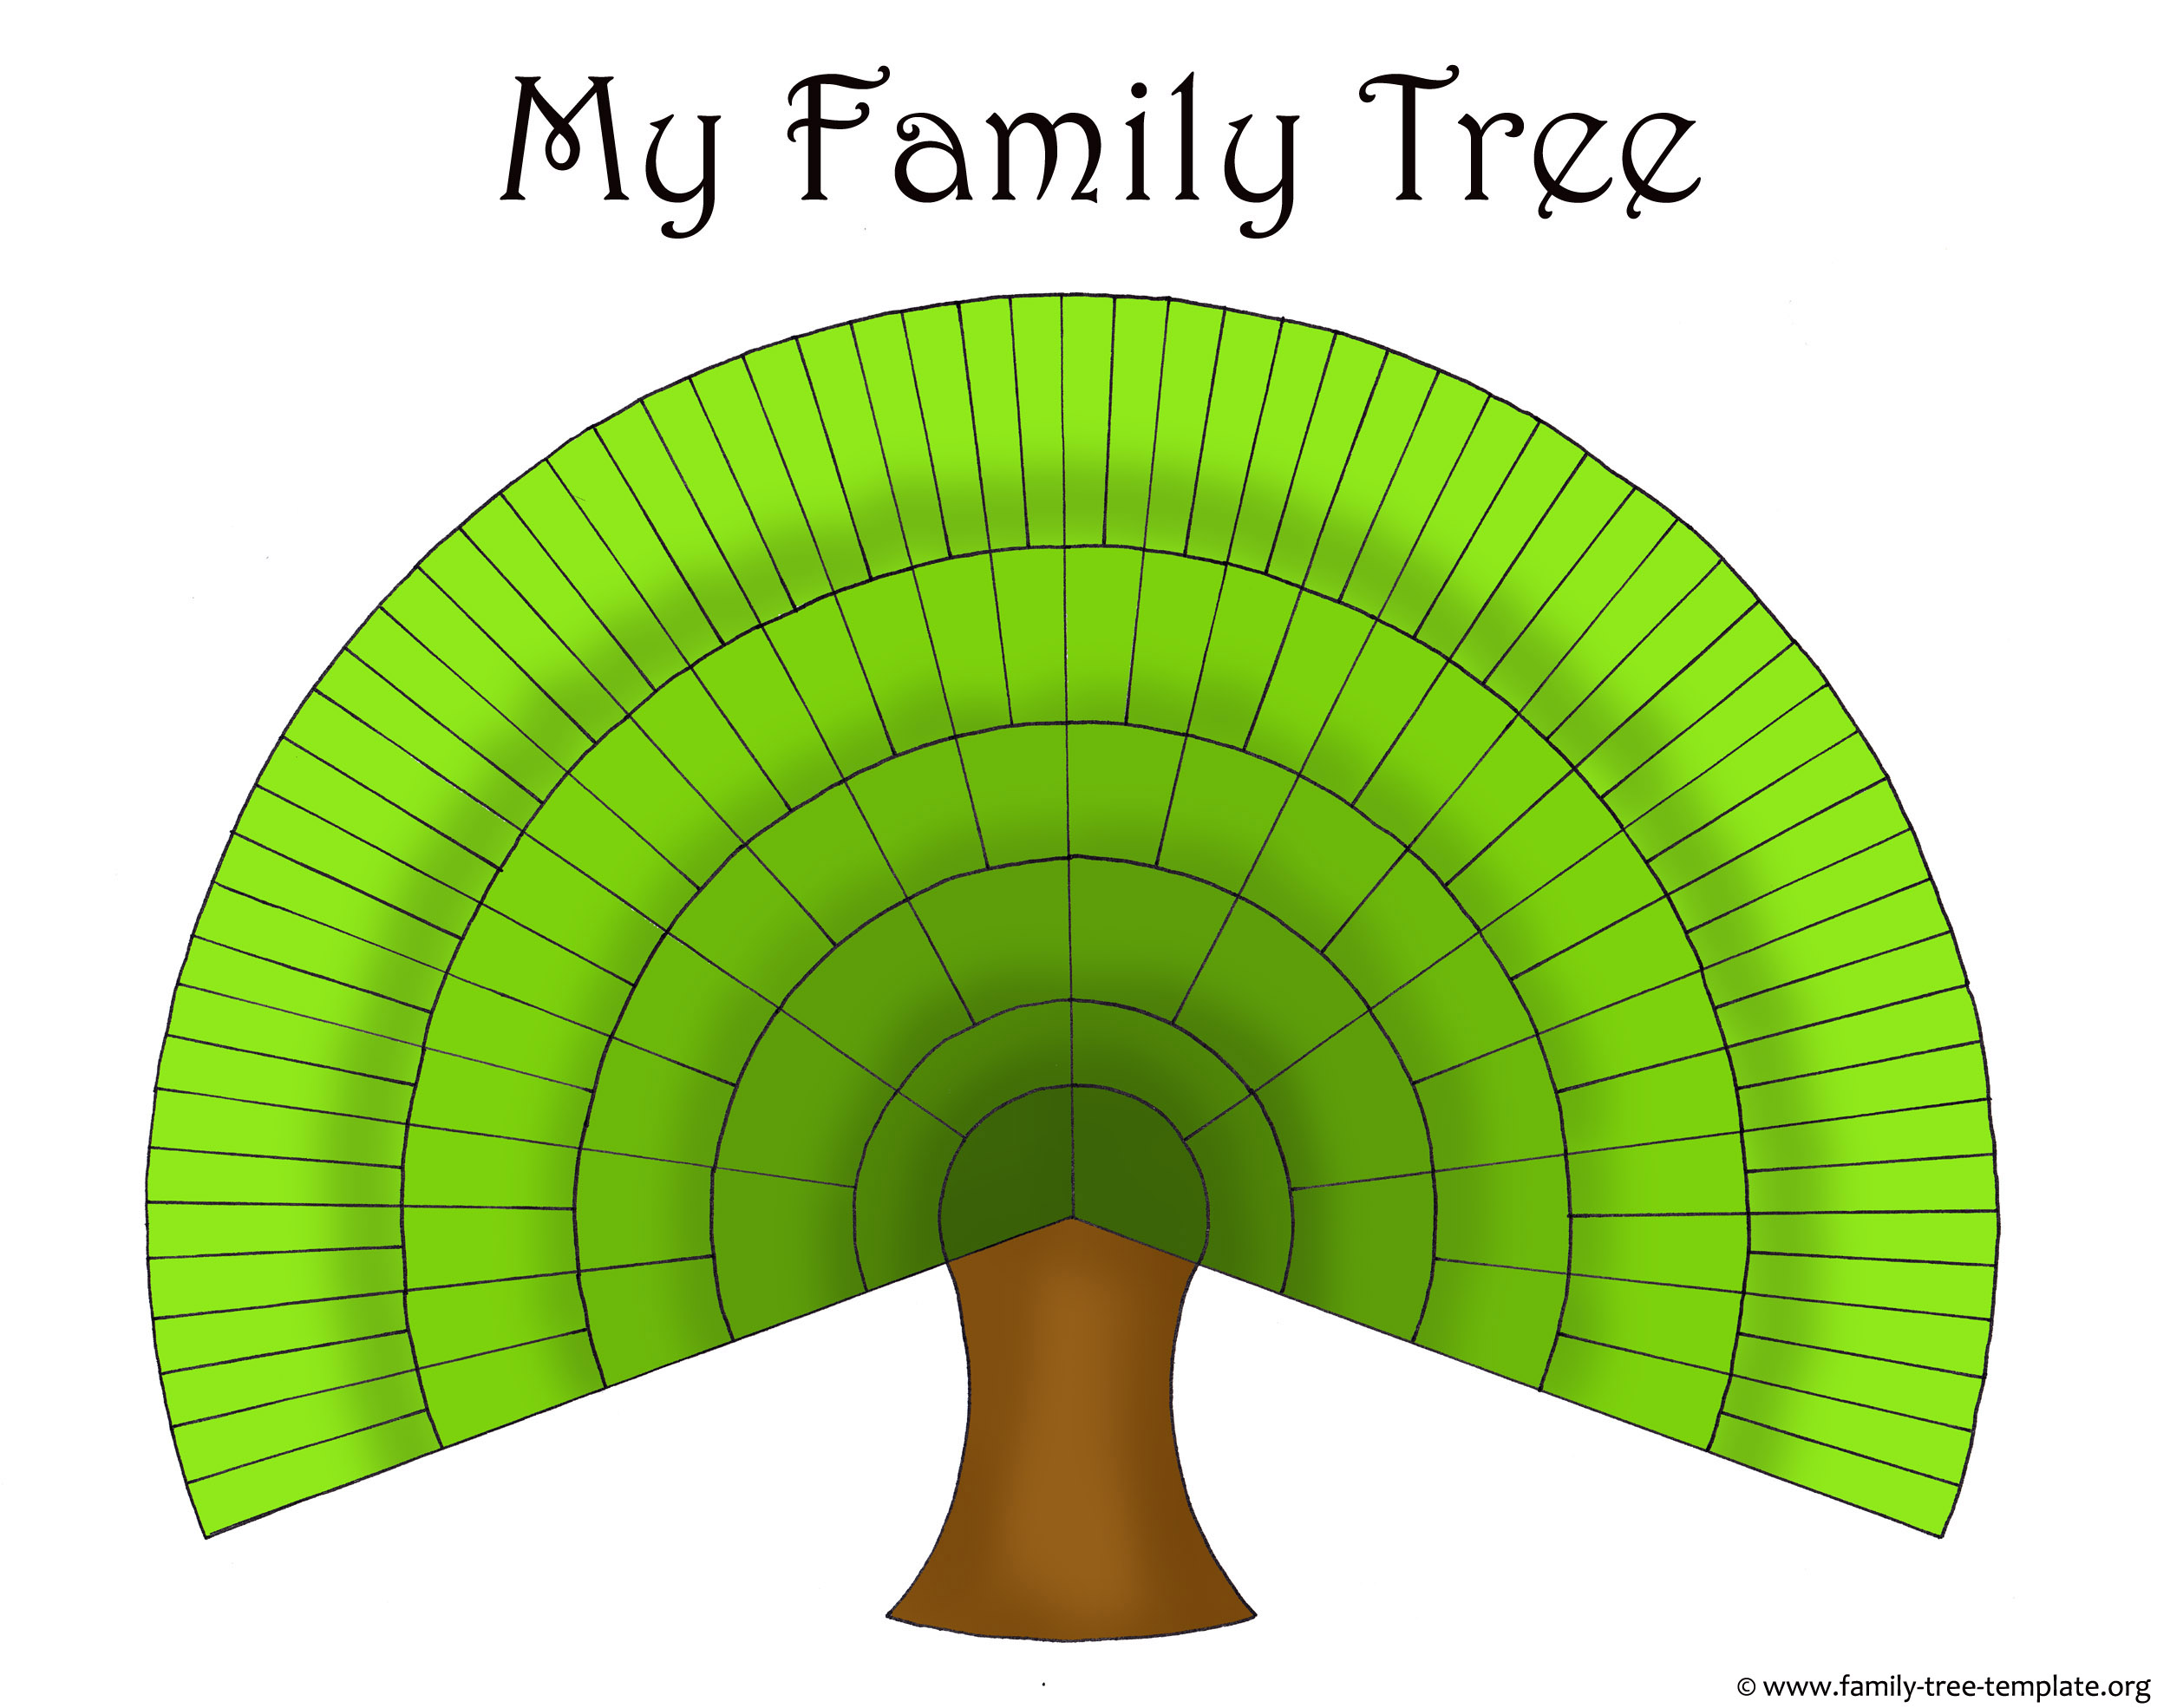 Blank Family Trees Templates and Free Genealogy Graphics | Family ...